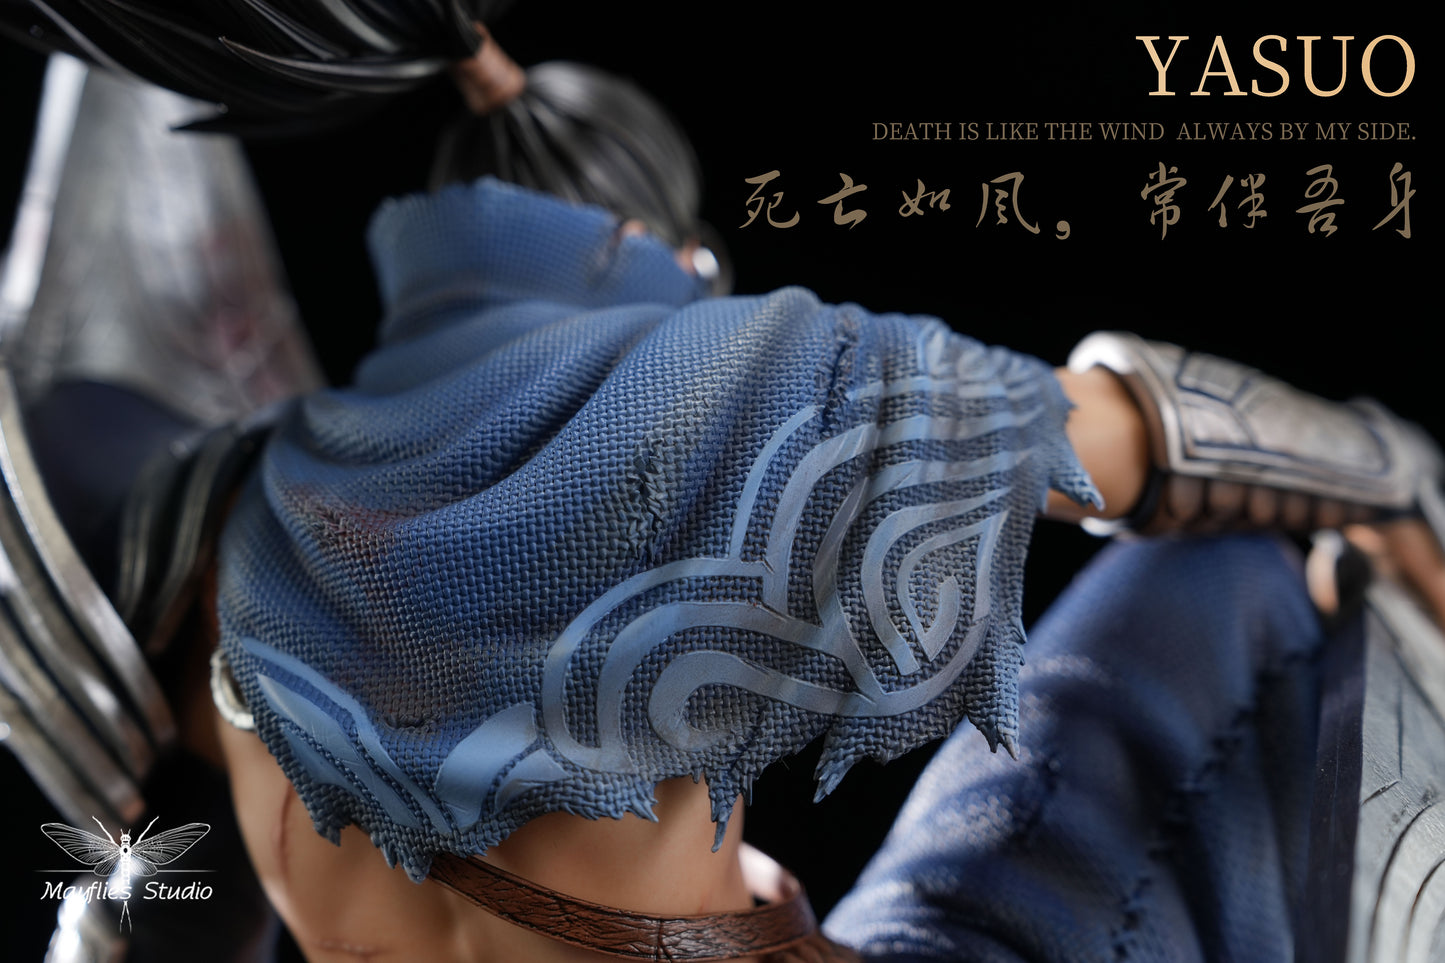 MAYFLIES STUDIO – LEAGUE OF LEGENDS: YASUO [SOLD OUT]